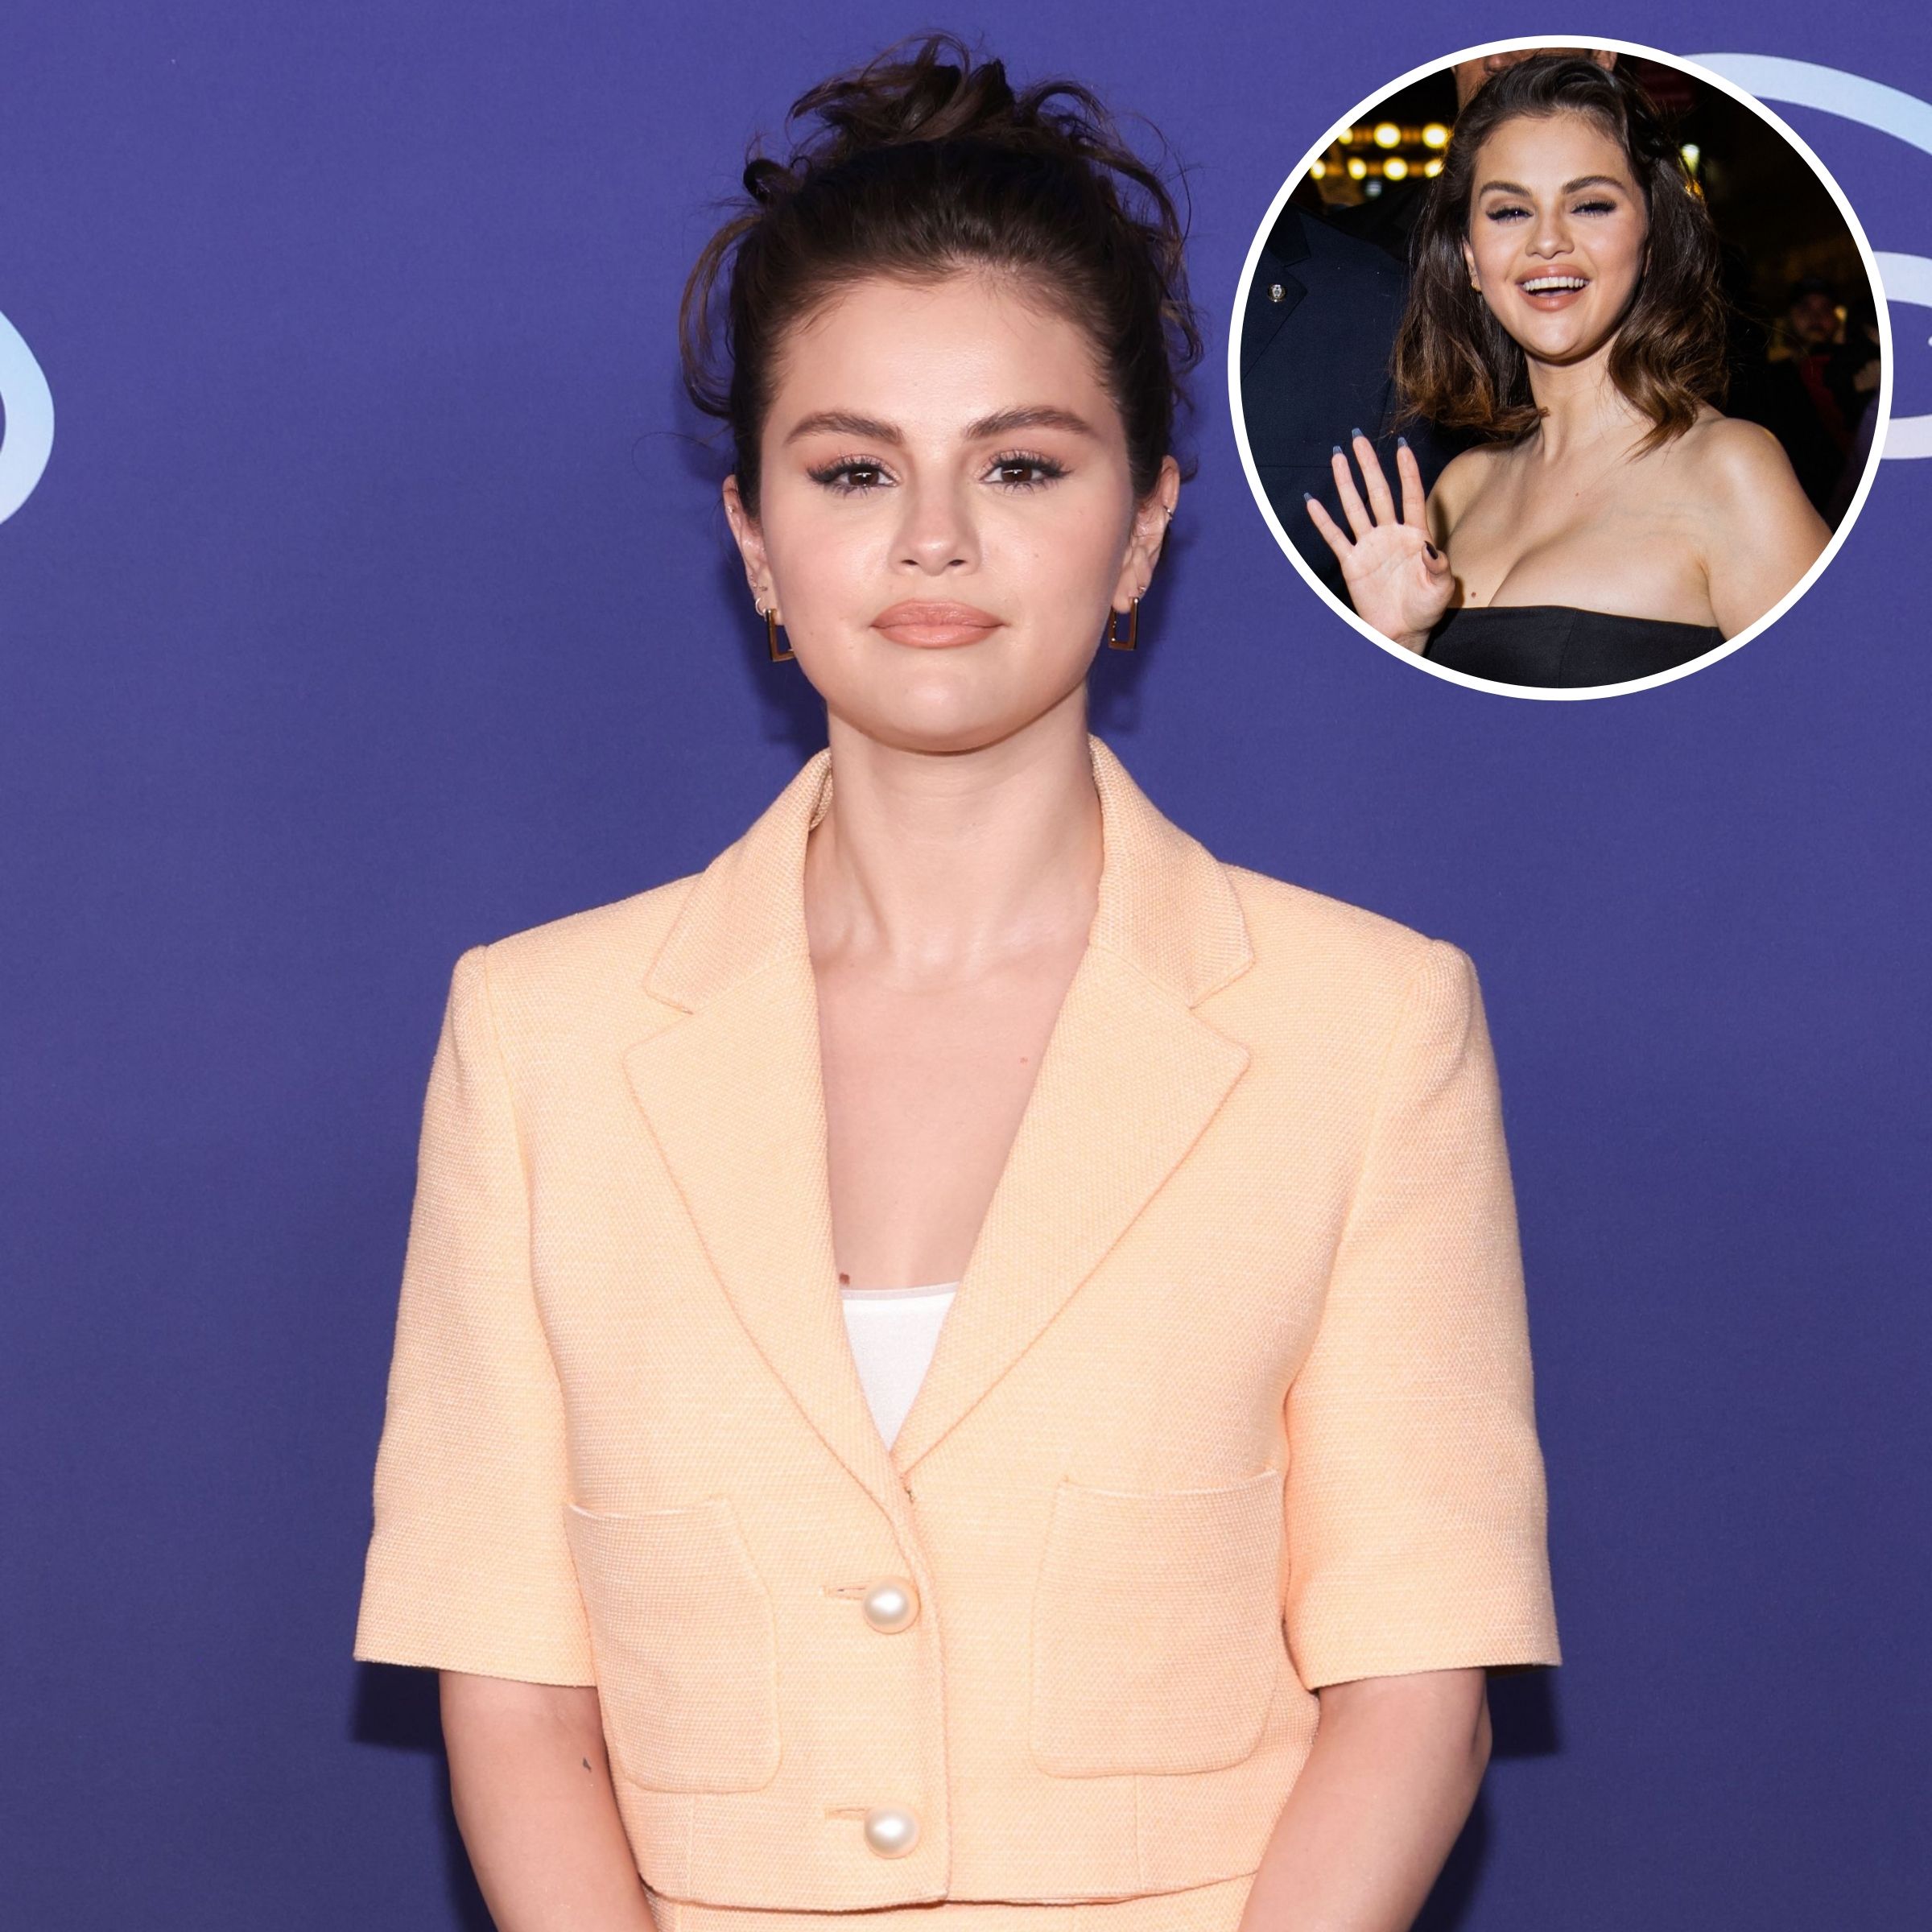 75th Emmy Awards: Selena Gomez slays in black sheer gown on red carpet